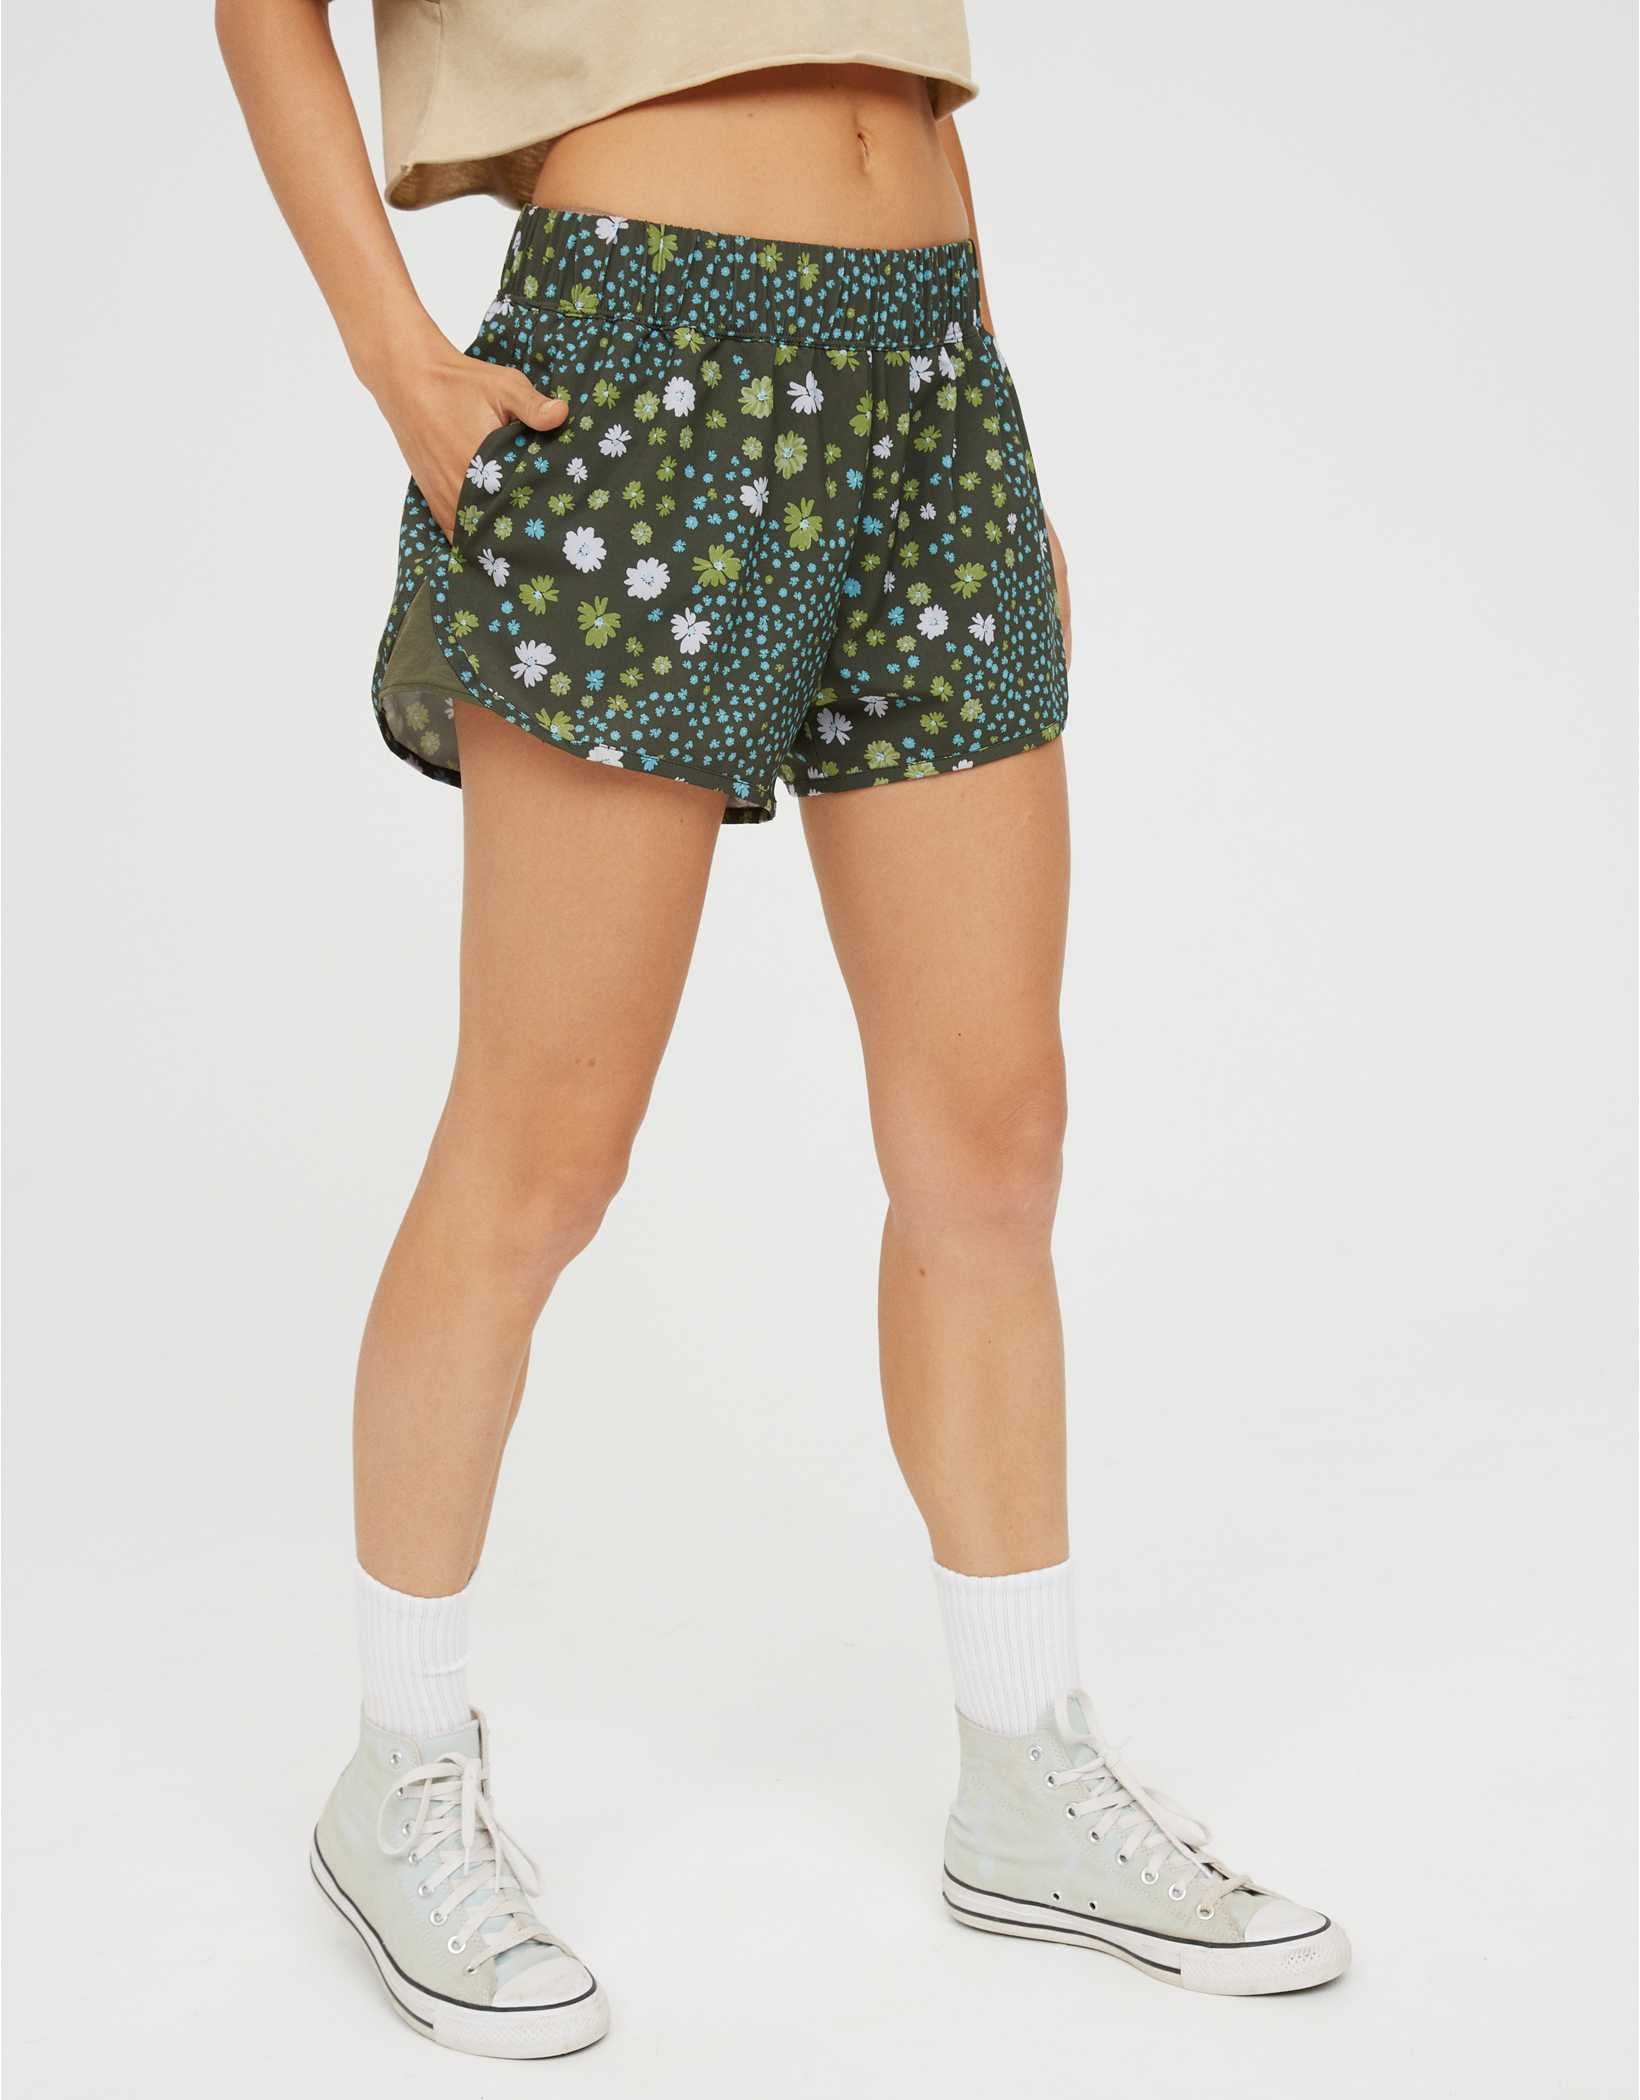 model wearing the shorts in green floral